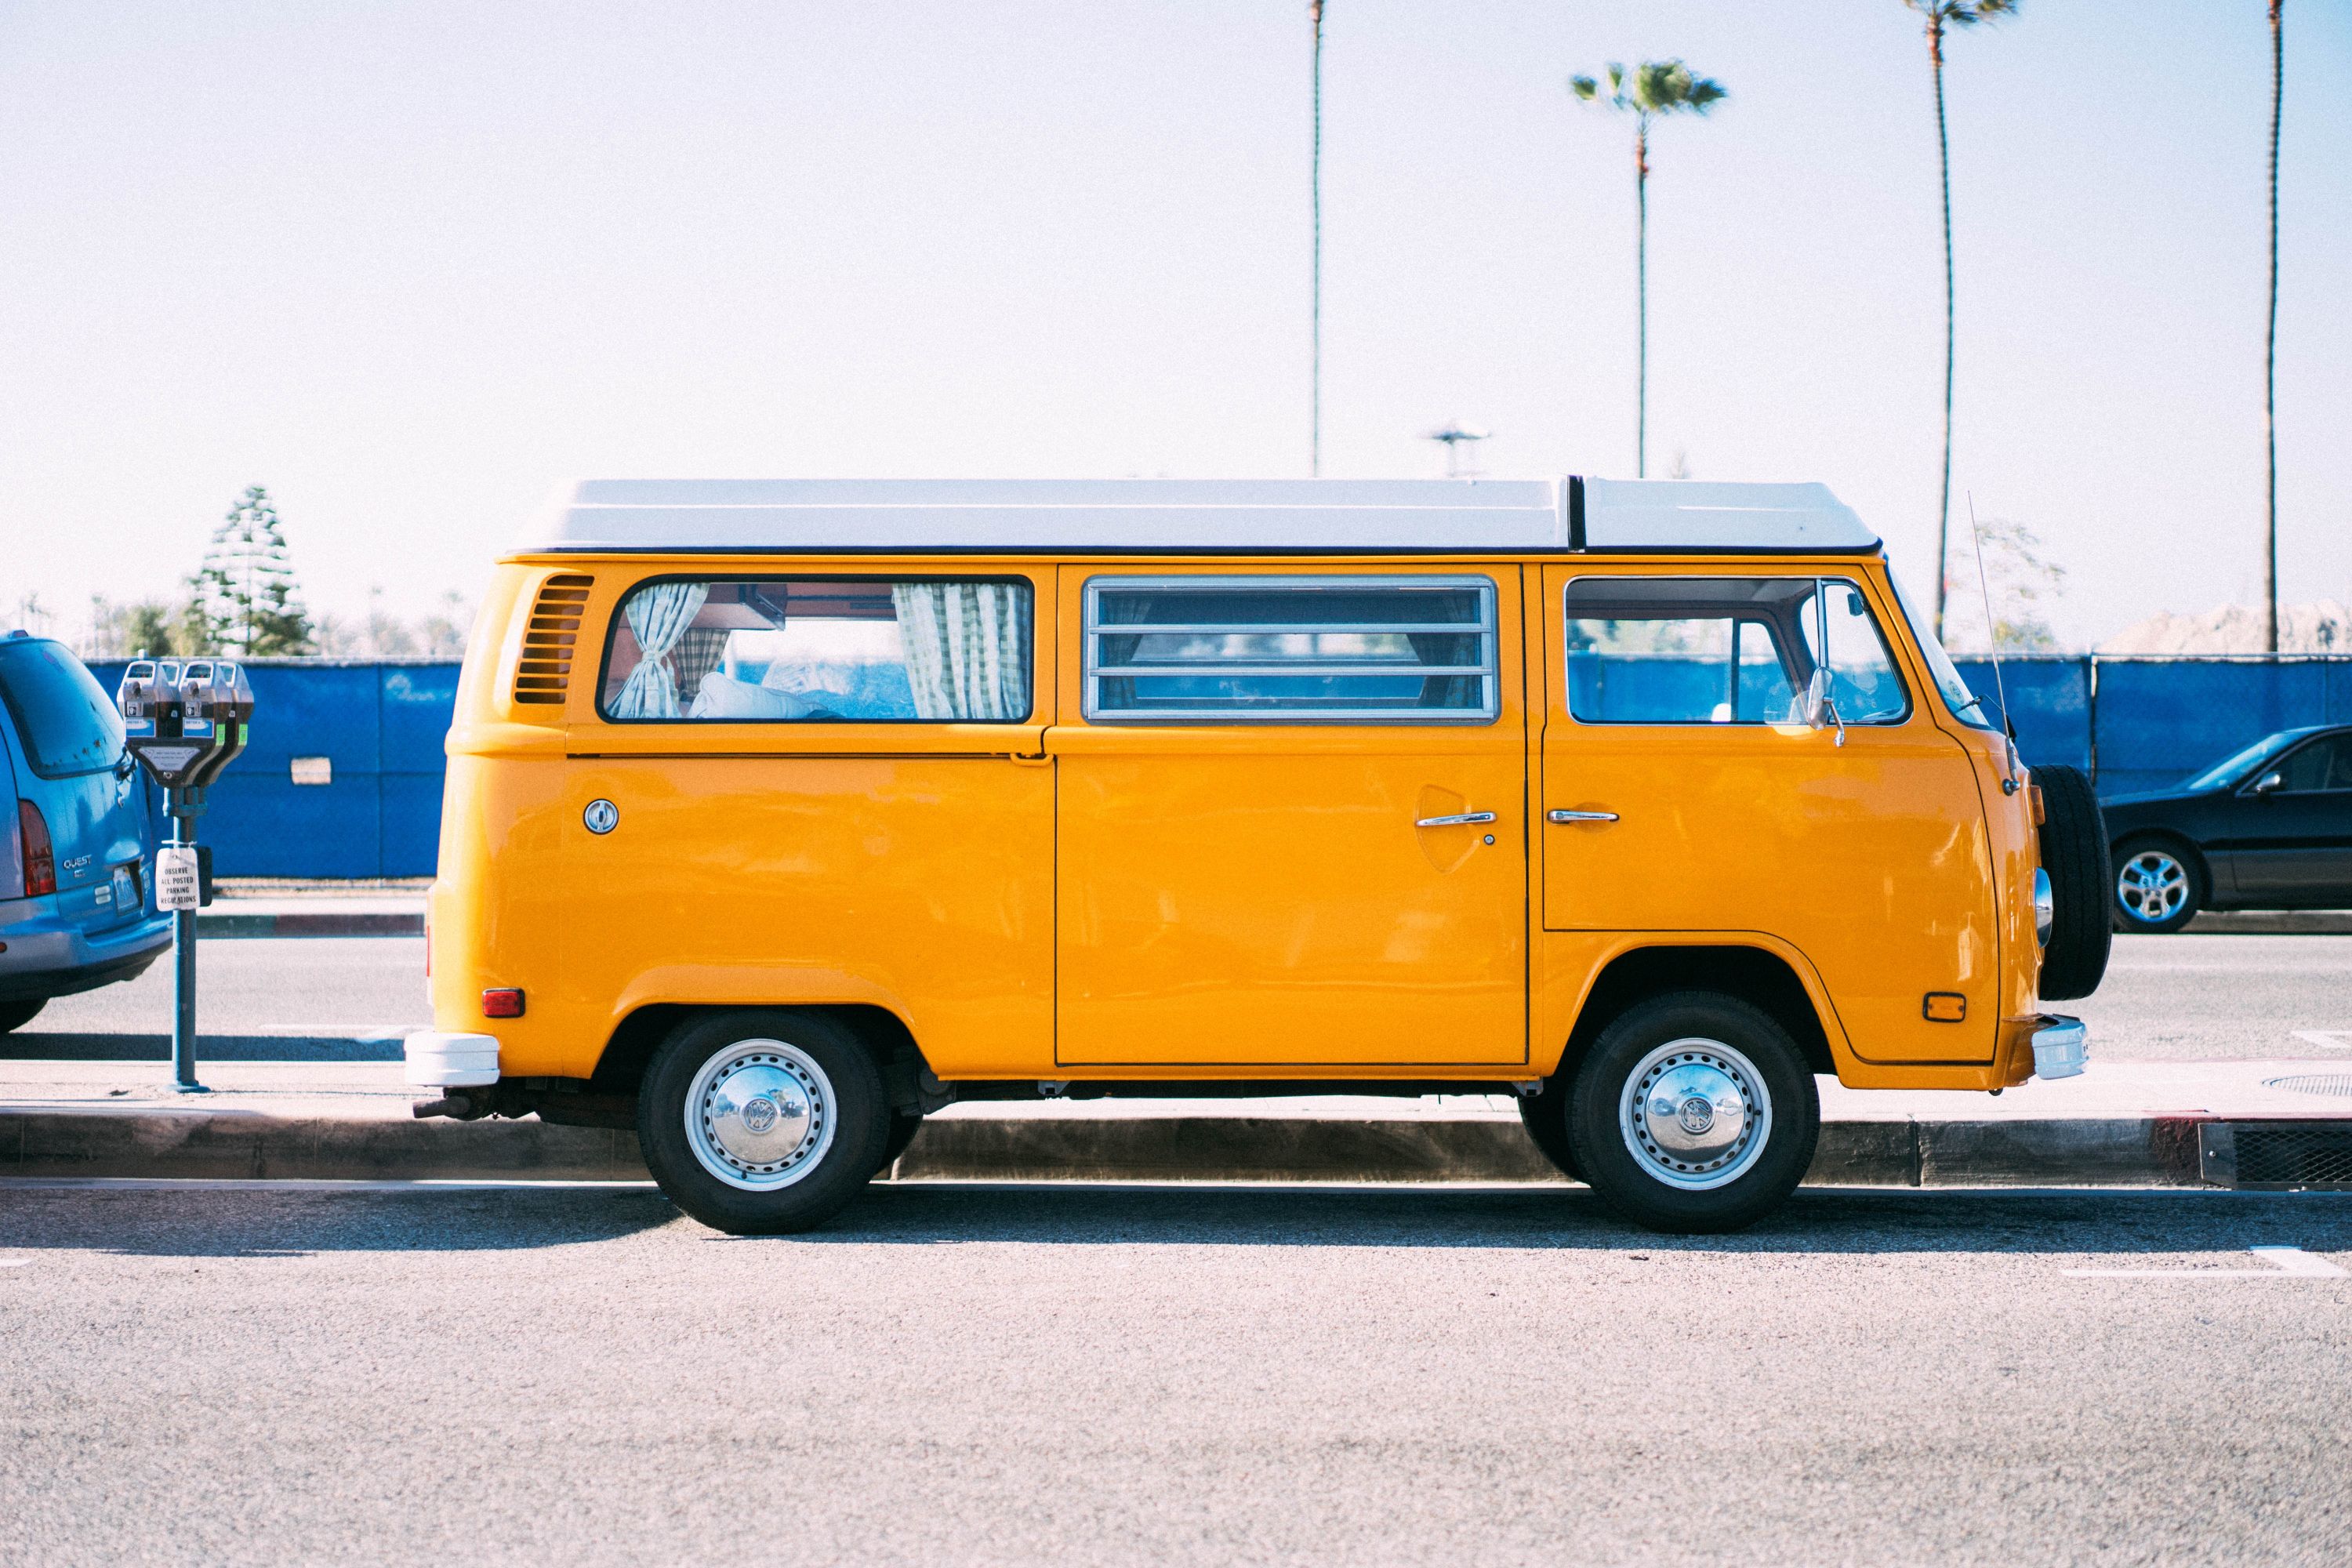 A picture of a yellow camper van parked on the side of the road.